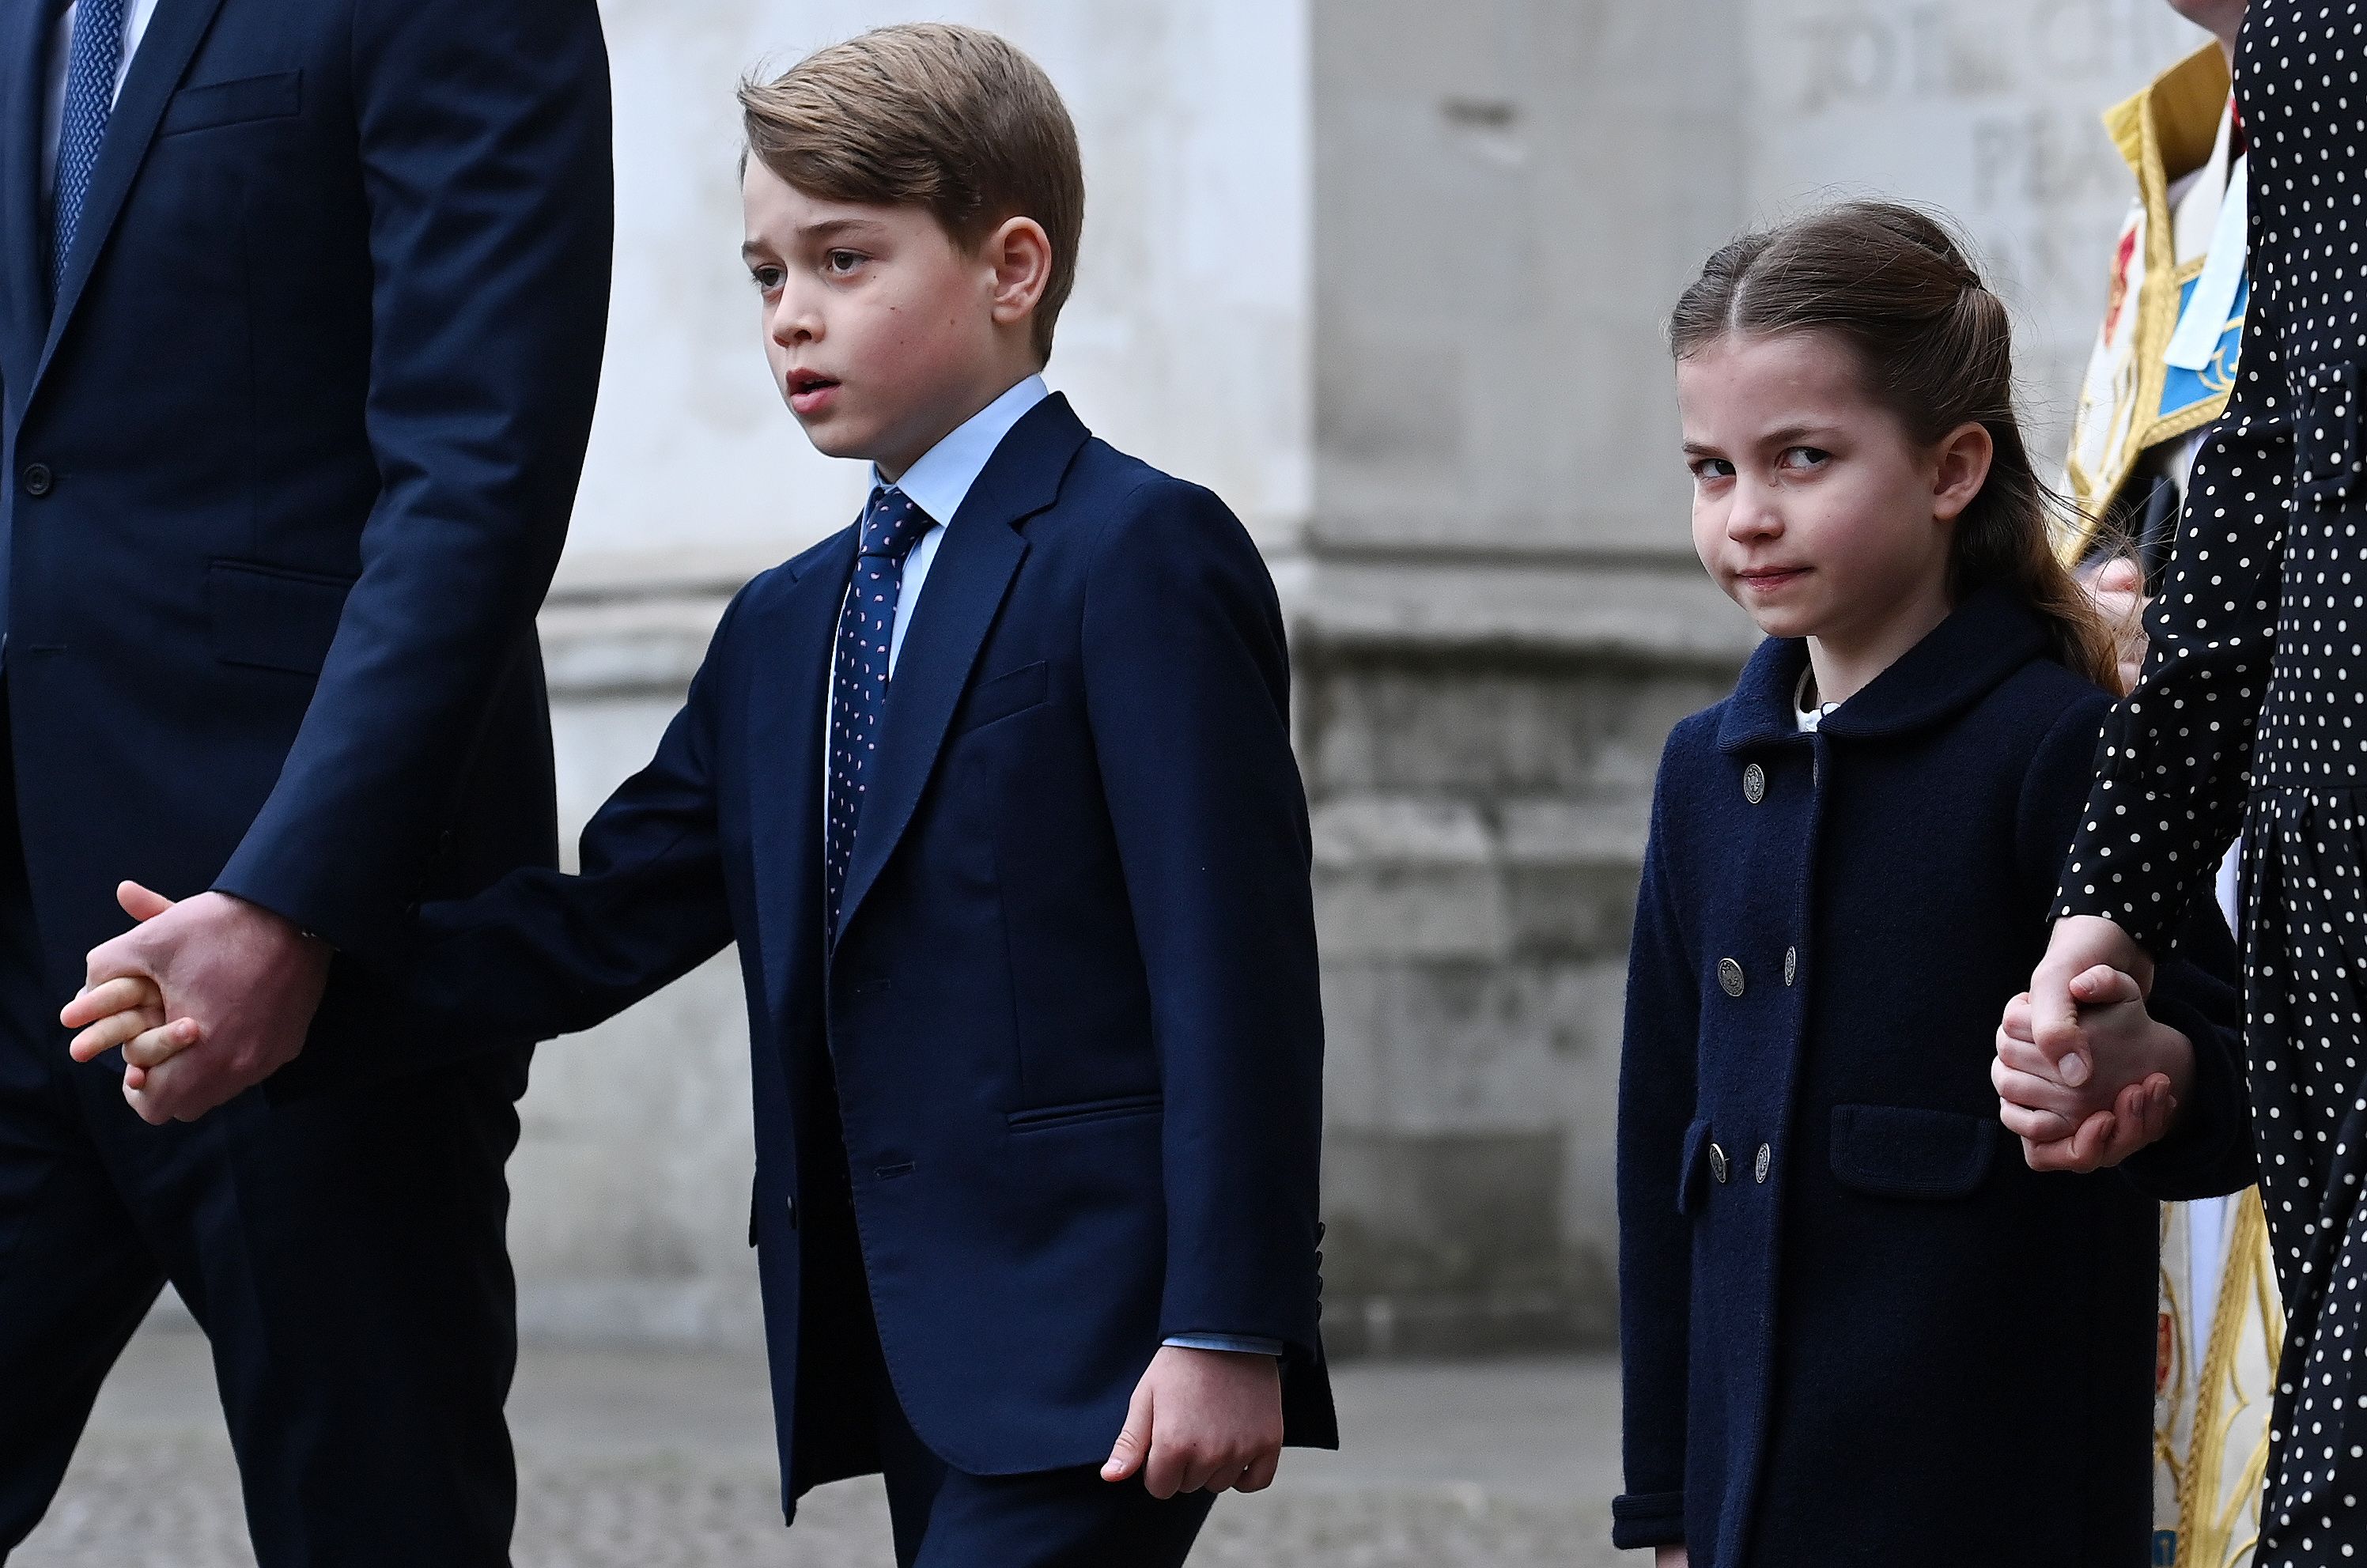 <p>Prince George and Princess Charlotte departed <a href="https://www.wonderwall.com/celebrity/princess-charlotte-and-prince-george-join-william-kate-and-the-queen-more-great-photos-from-the-royals-prince-philip-memorial-service-of-thanksgiving-578498.gallery">the service of thanksgiving celebrating the life of their late great-grandfather</a>, Prince Philip, at Westminster Abbey in London on March 29, 2022.</p>